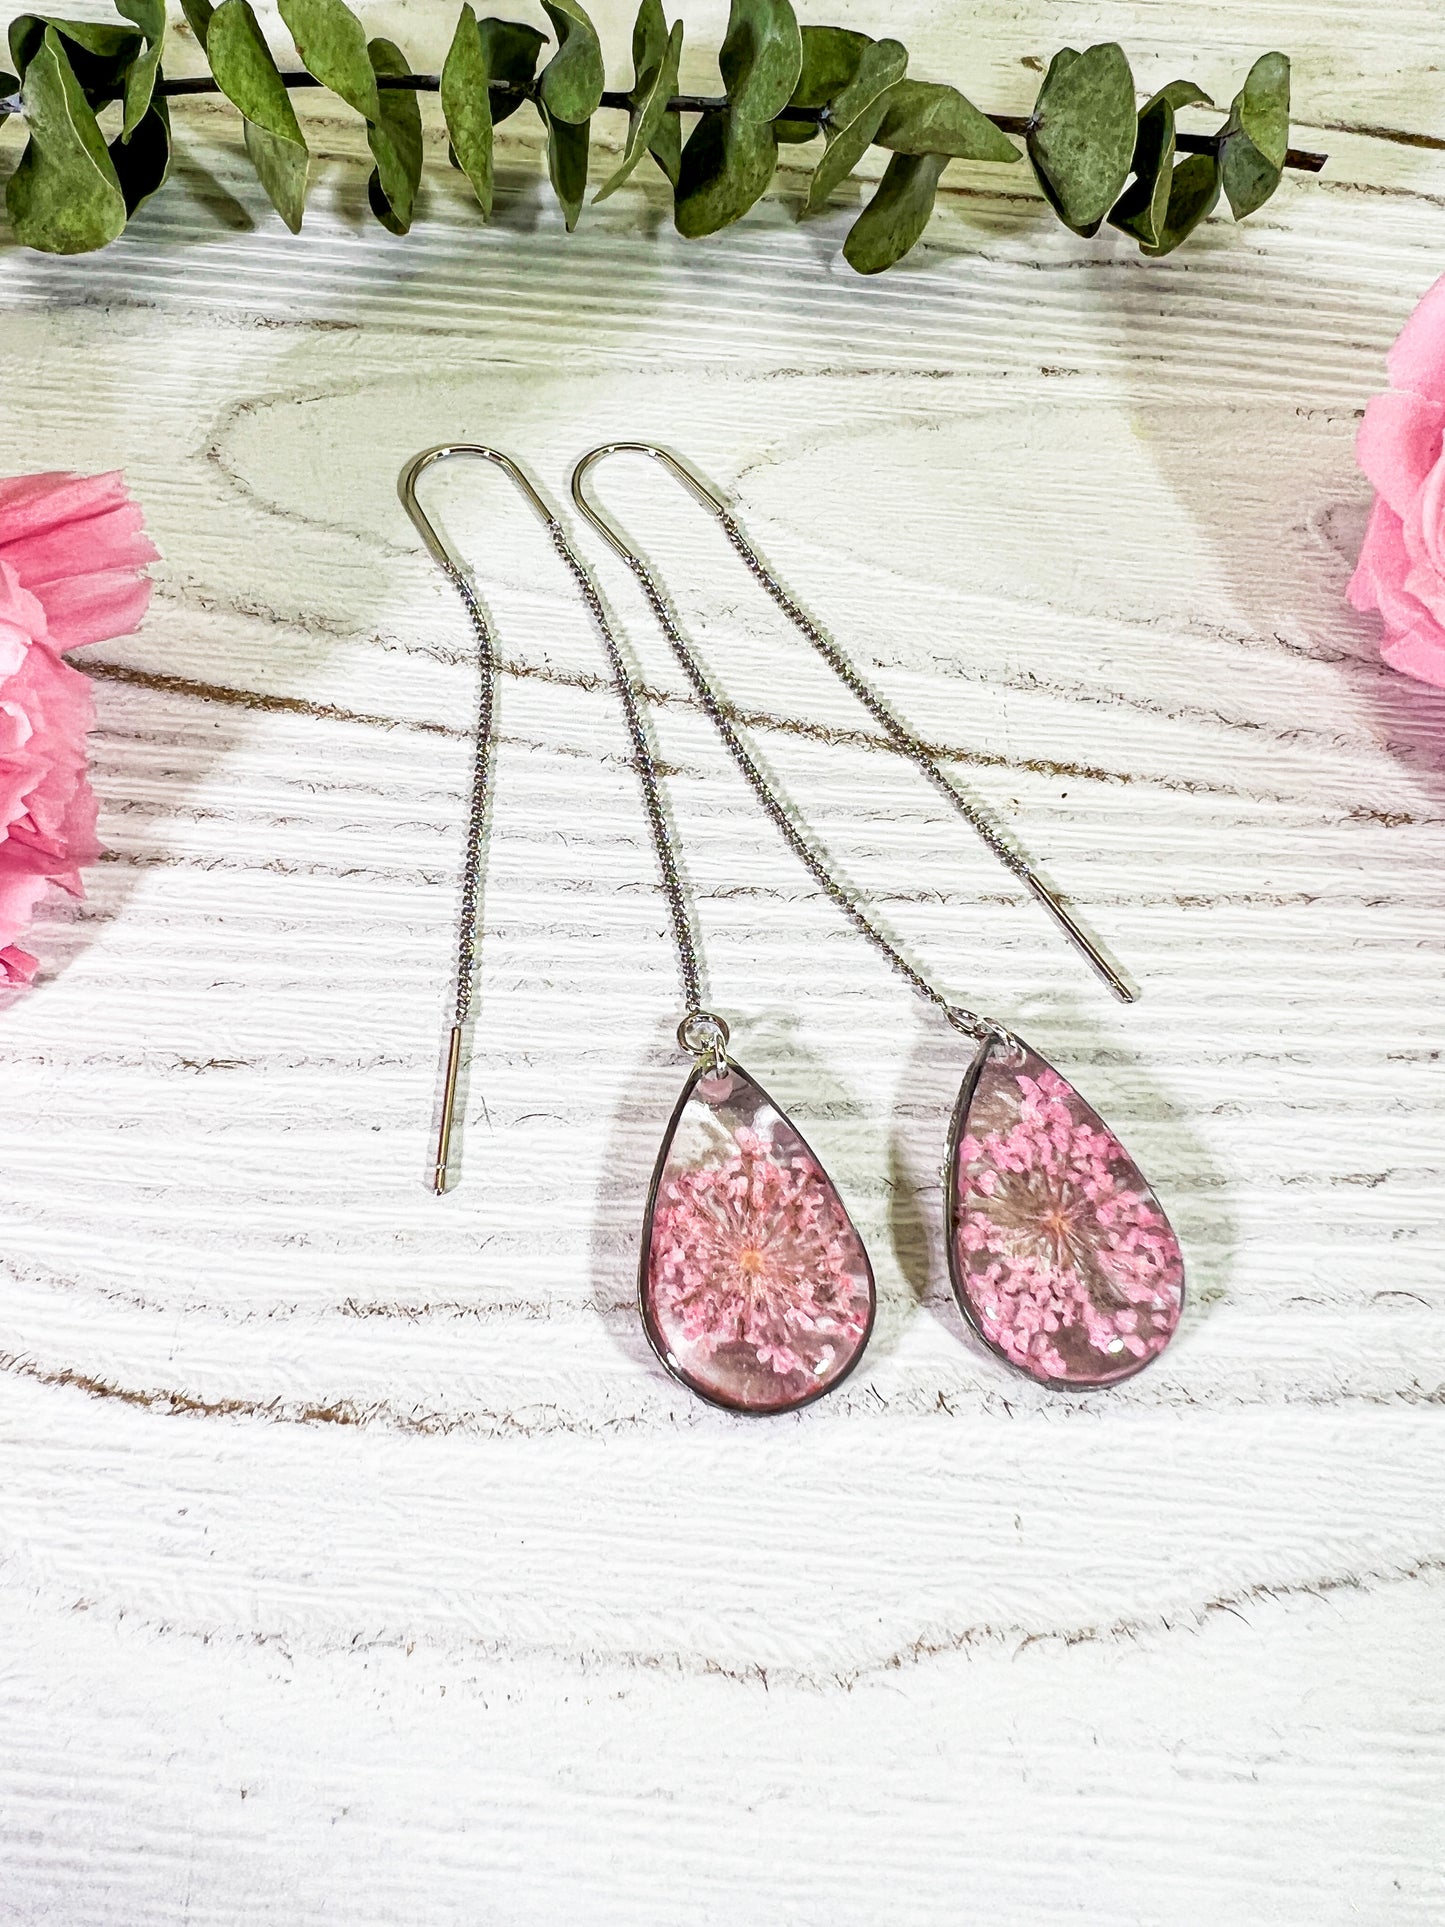 Load image into Gallery viewer, Pink Queen Anne’s lace ear threader earrings
